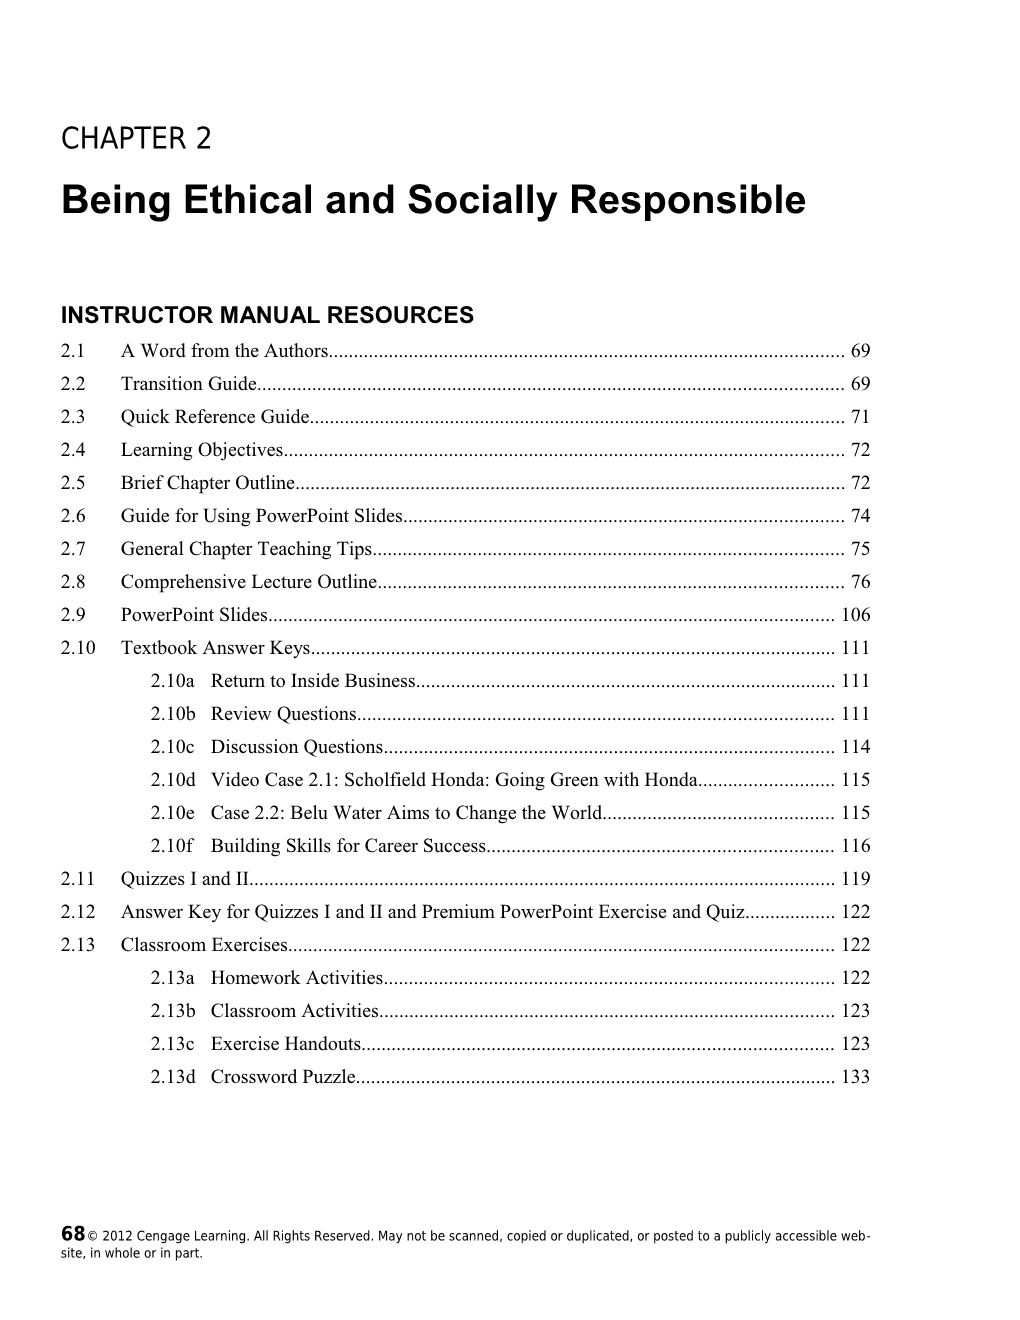 Being Ethical and Socially Responsible